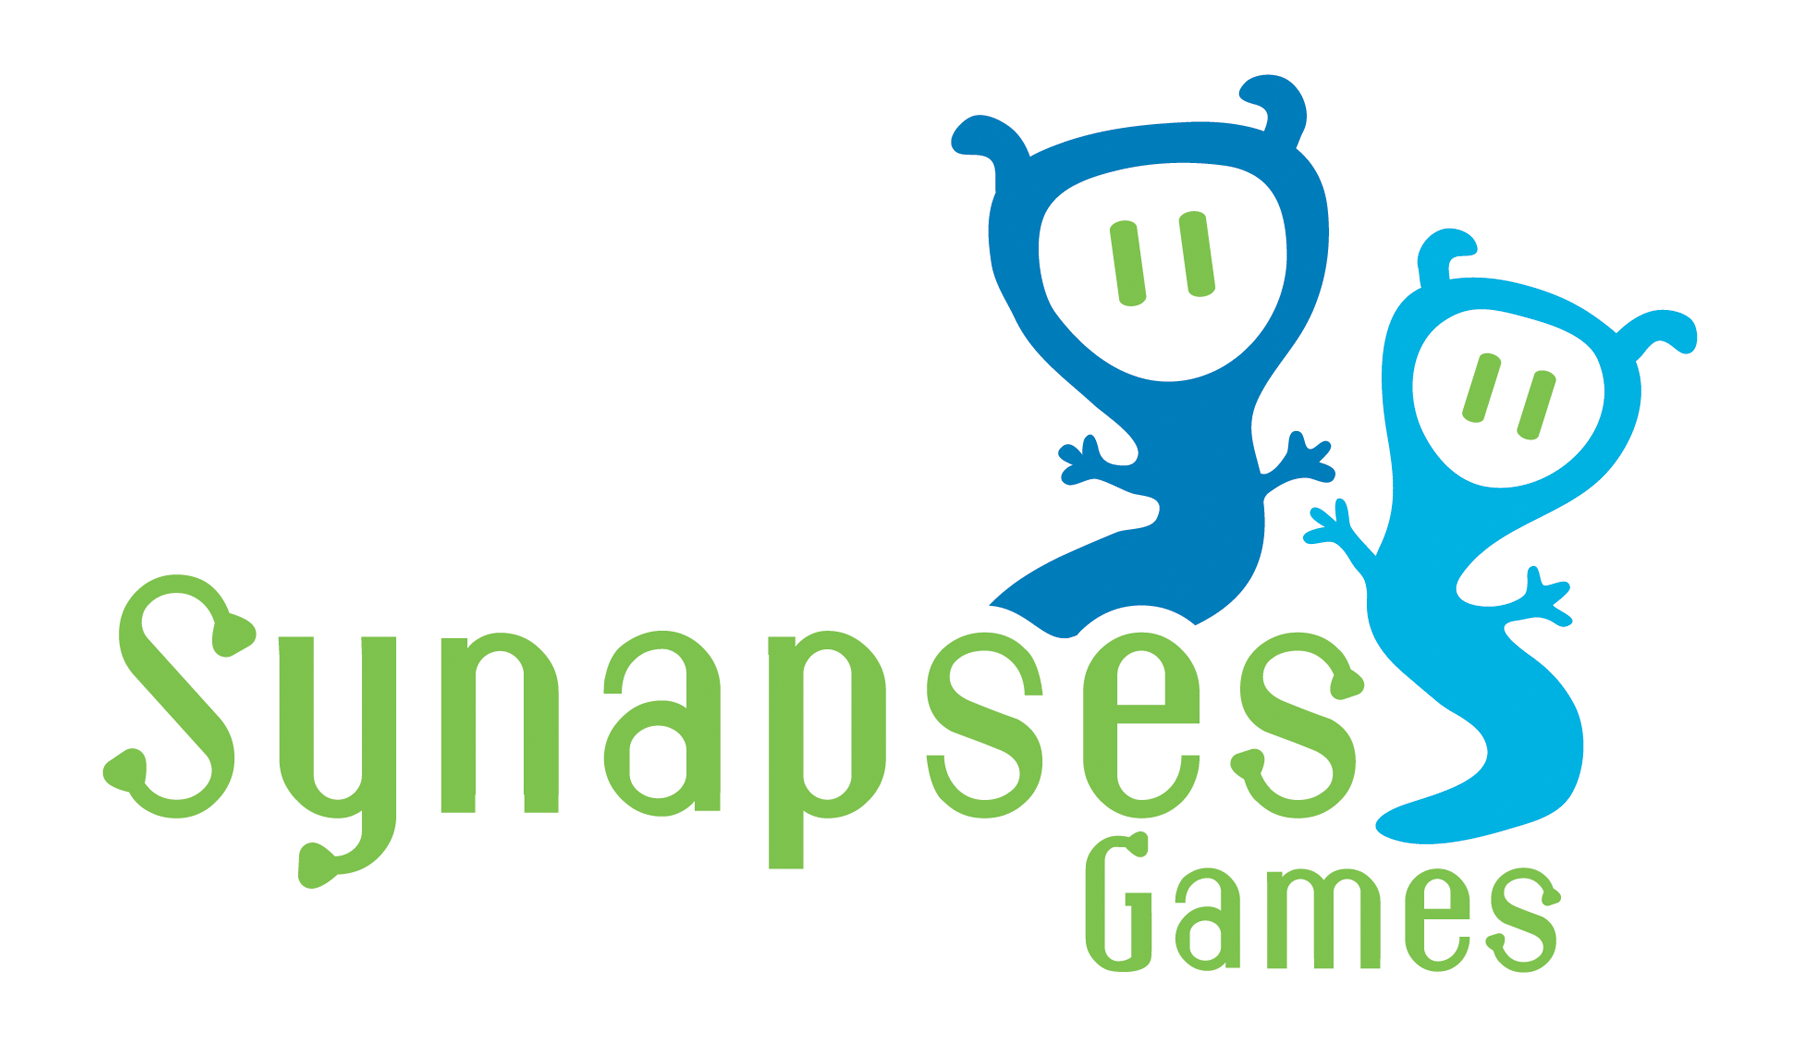 synapses games logo